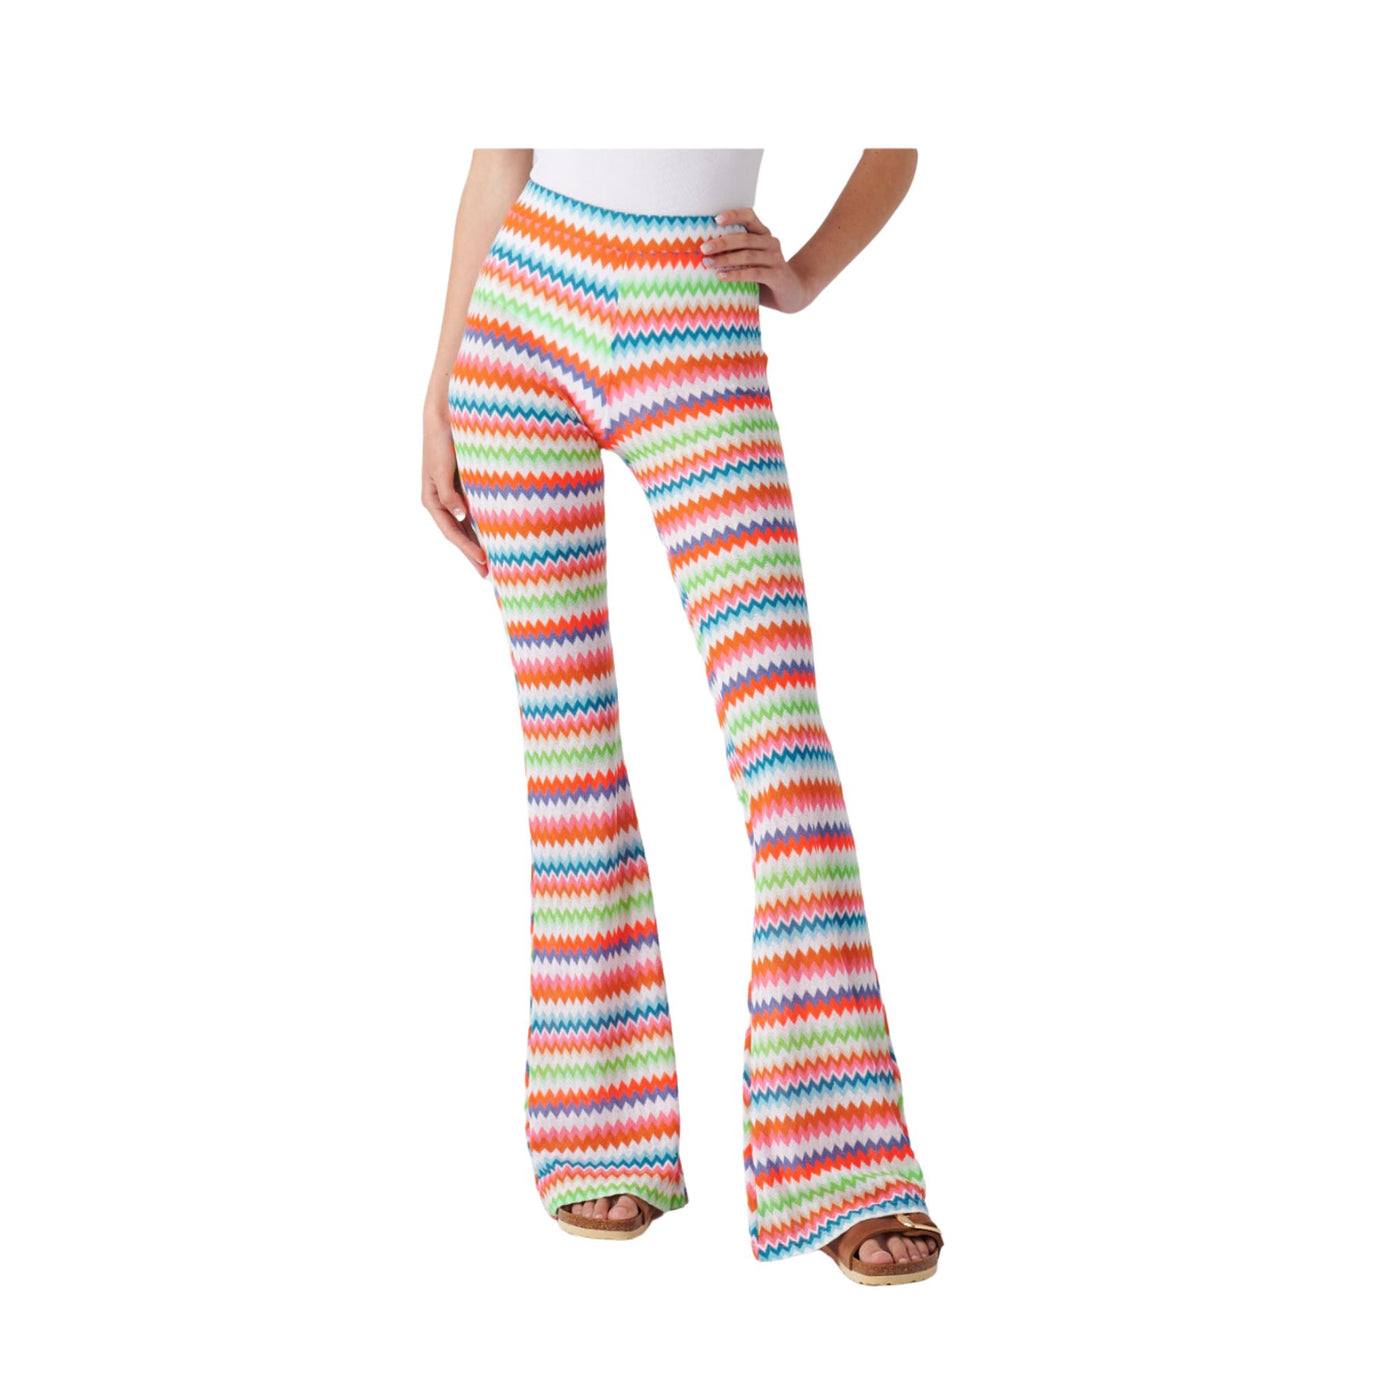 Women's trousers with multicolored pattern